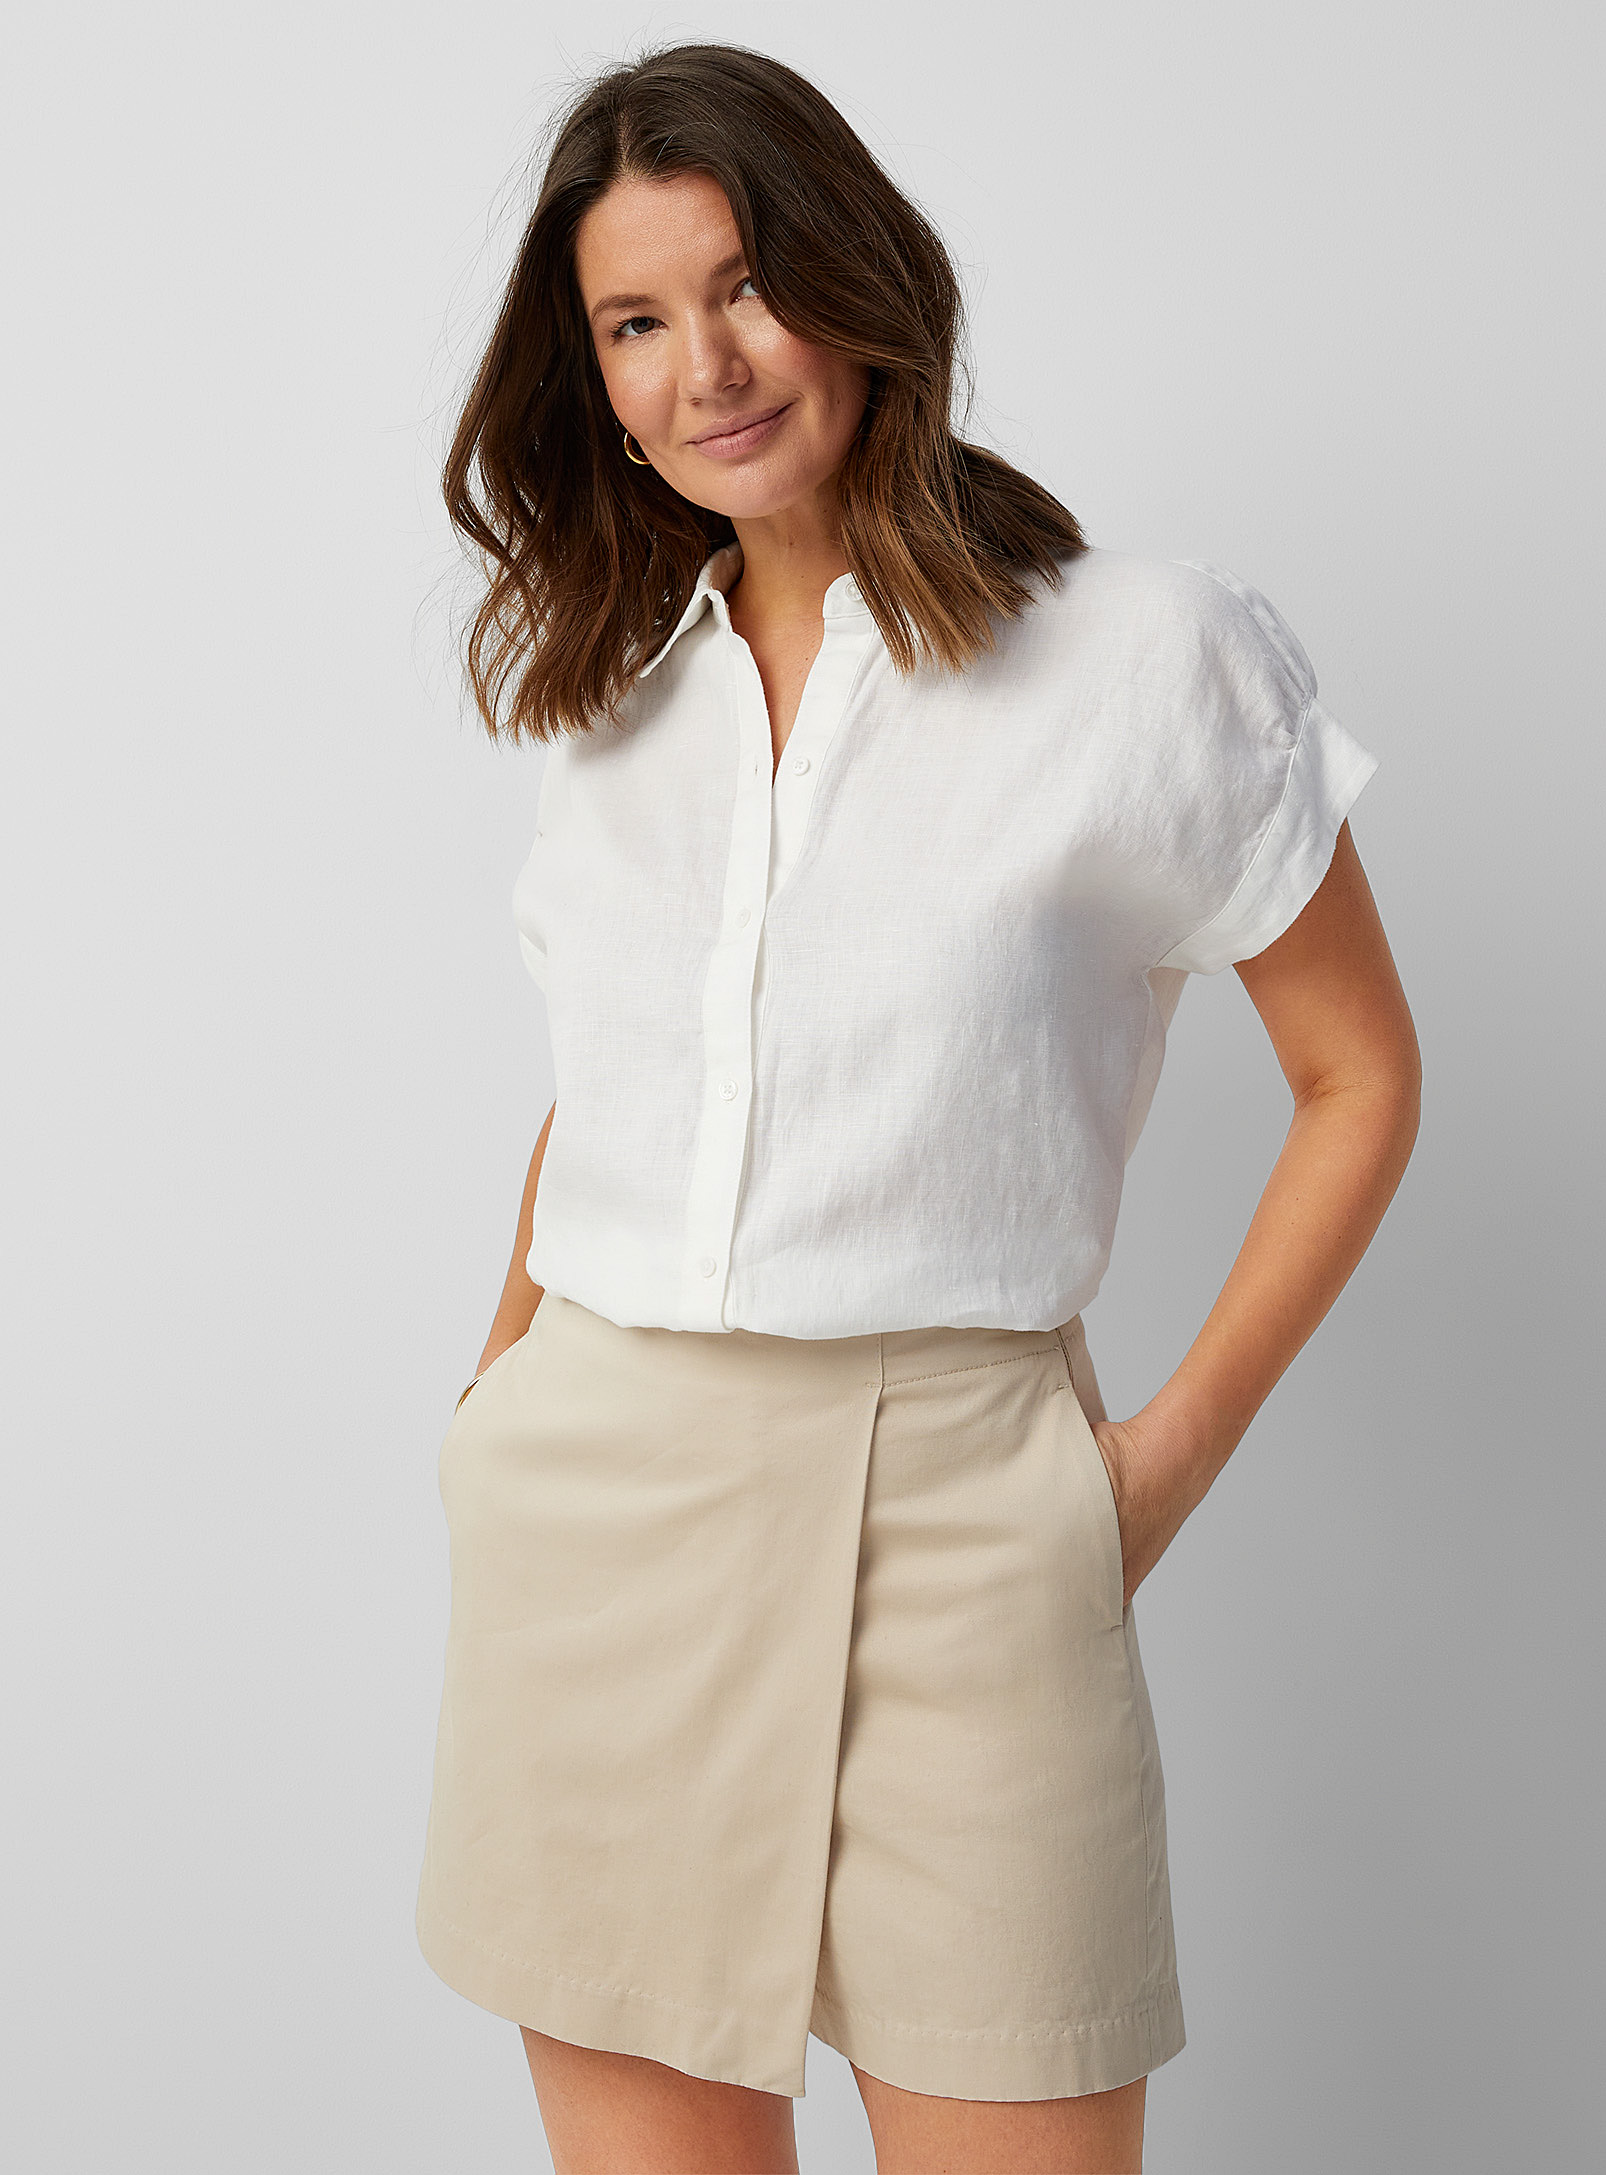 Contemporaine Cap Sleeves Loose Pure Linen Shirt In White